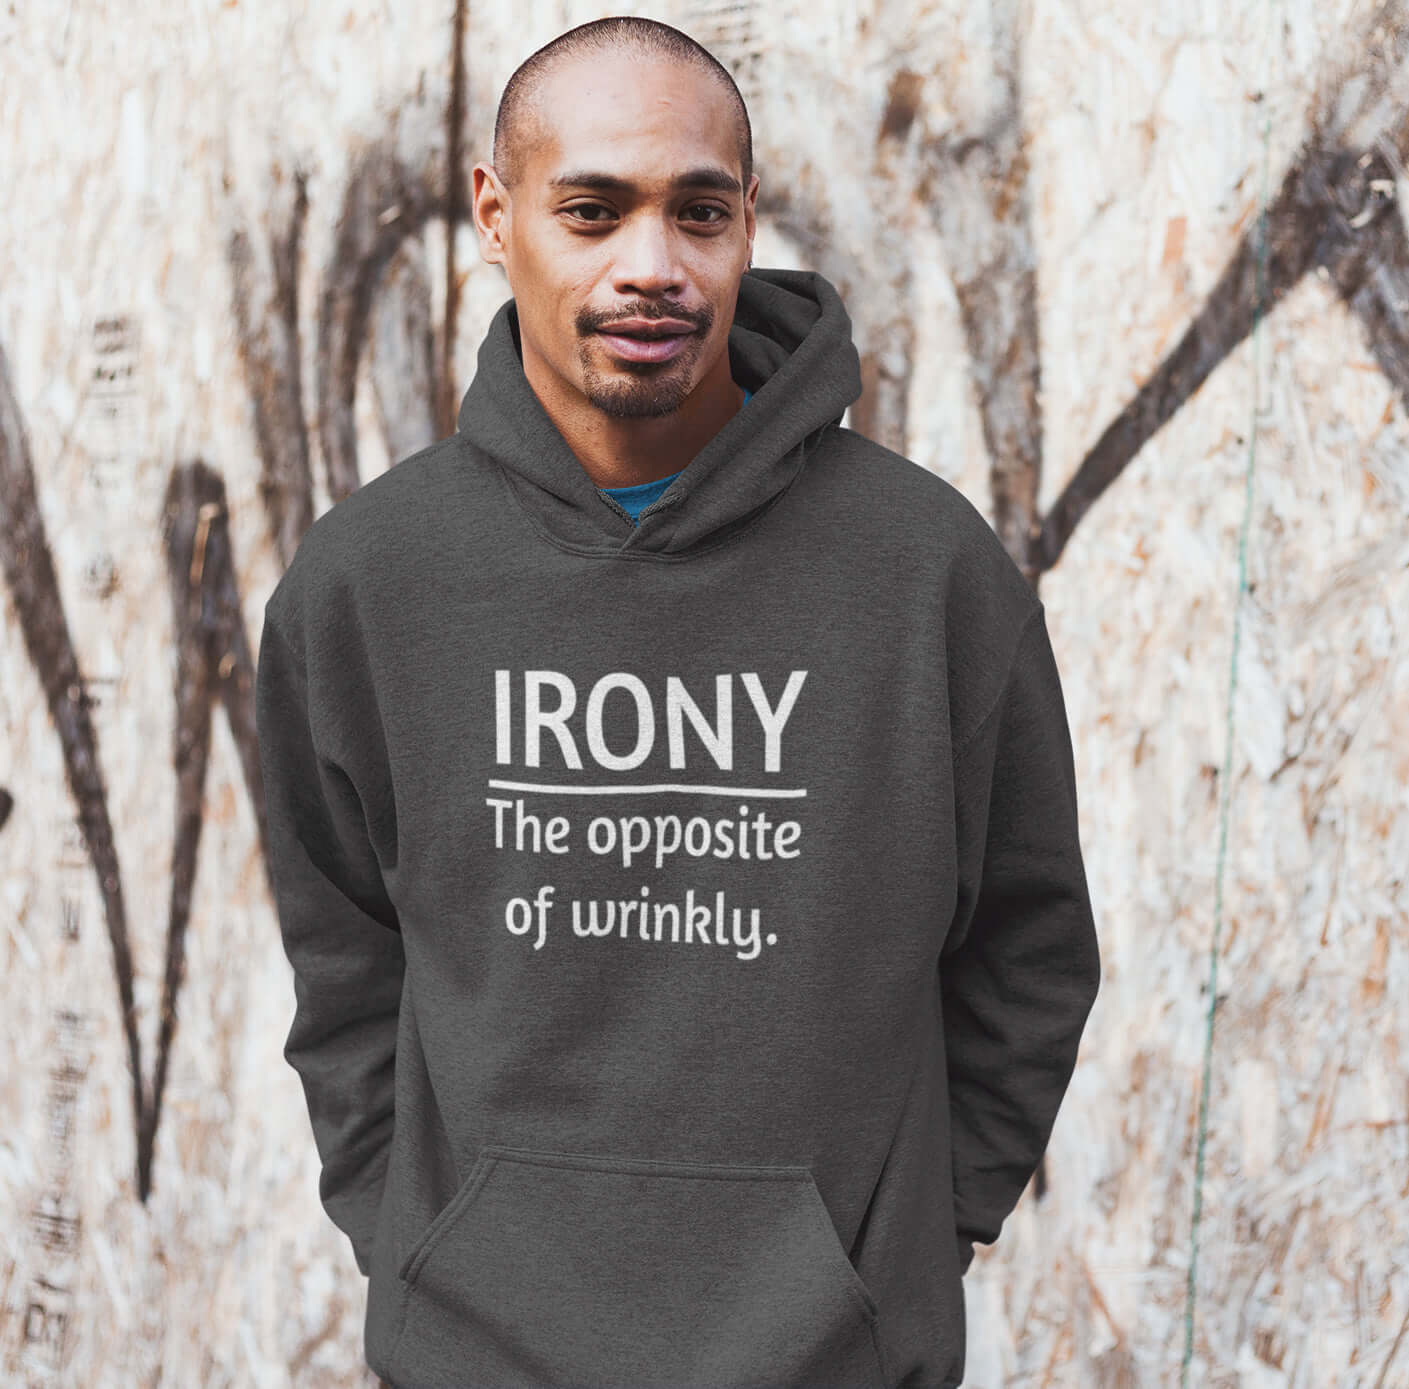 Man wearing a dark grey hoodie sweatshirt with the funny phrase Irony, the opposite of wrinkly printed on the front.